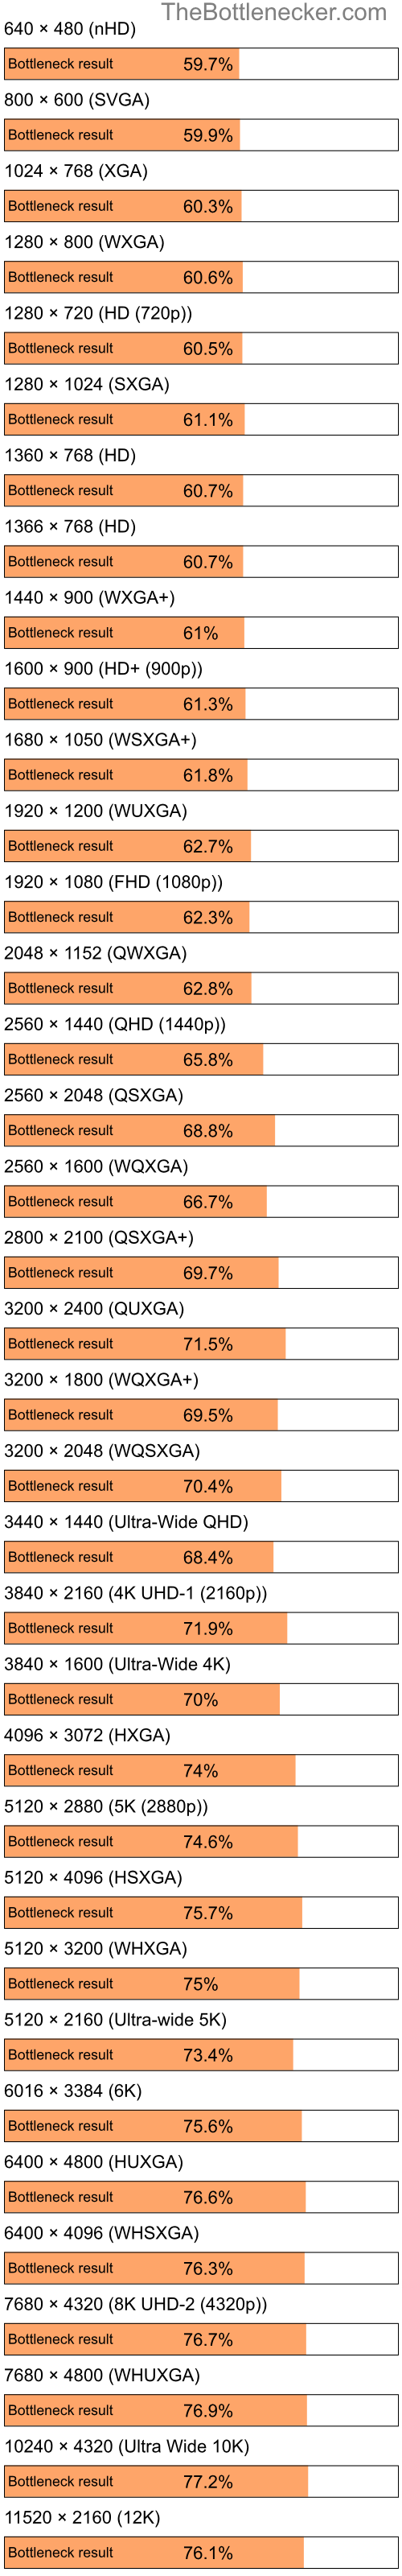 Bottleneck results by resolution for Intel Celeron and NVIDIA Quadro FX 3000 in Processor Intense Tasks